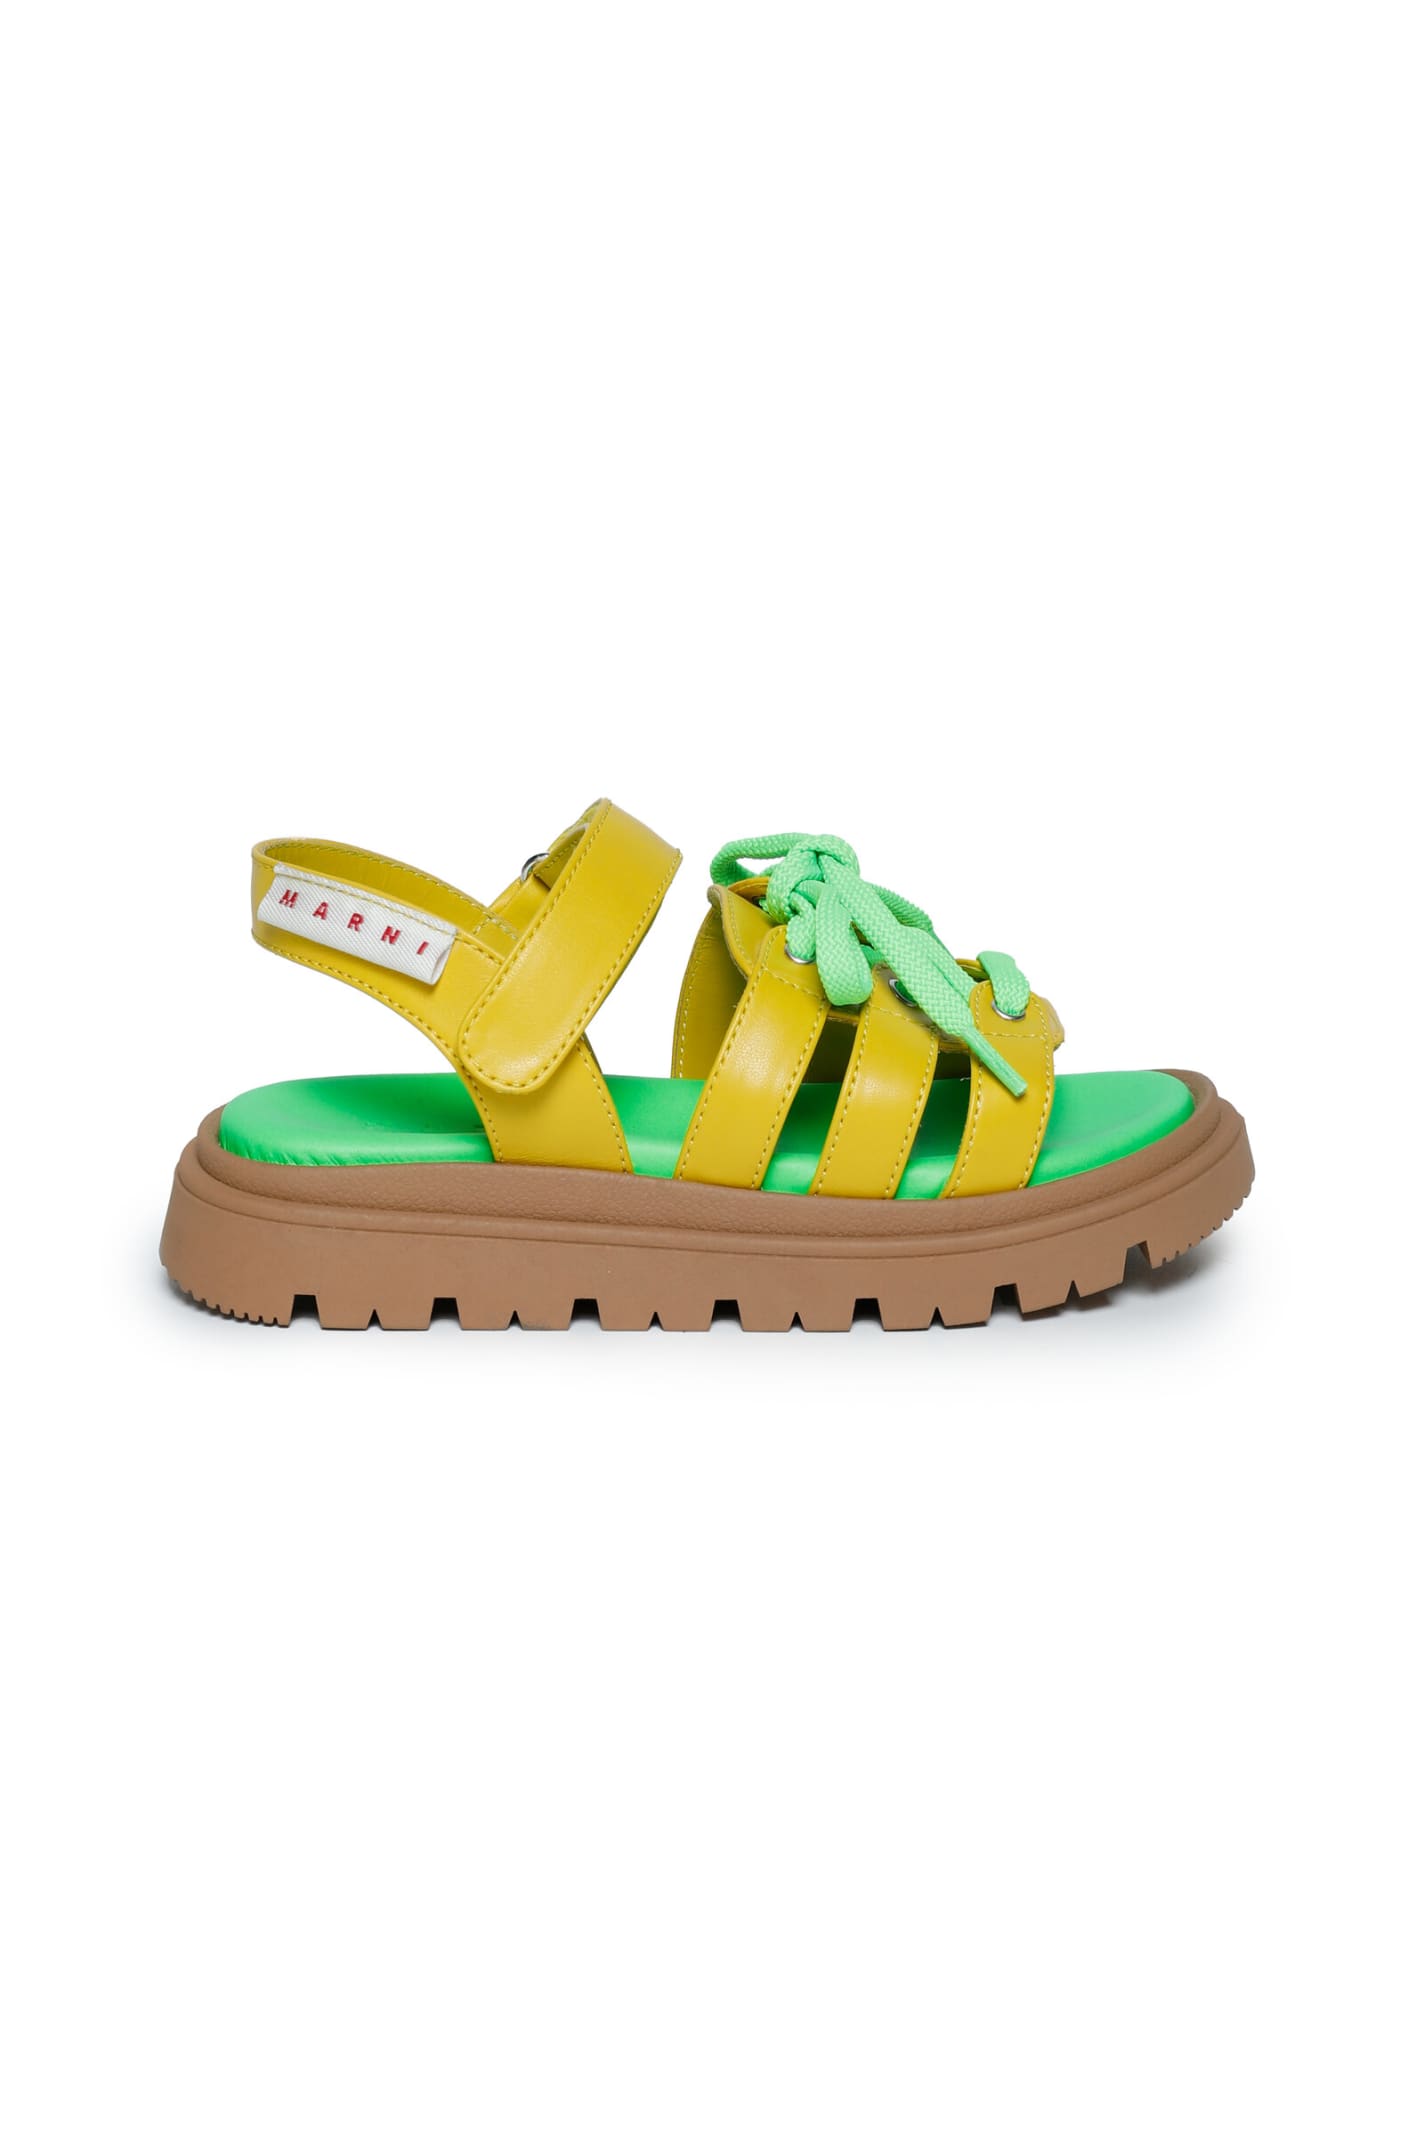 MARNI MT73463 VAR3 SANDALS MARNI YELLOW SANDALS WITH LACES AND CHUNKY SOLE